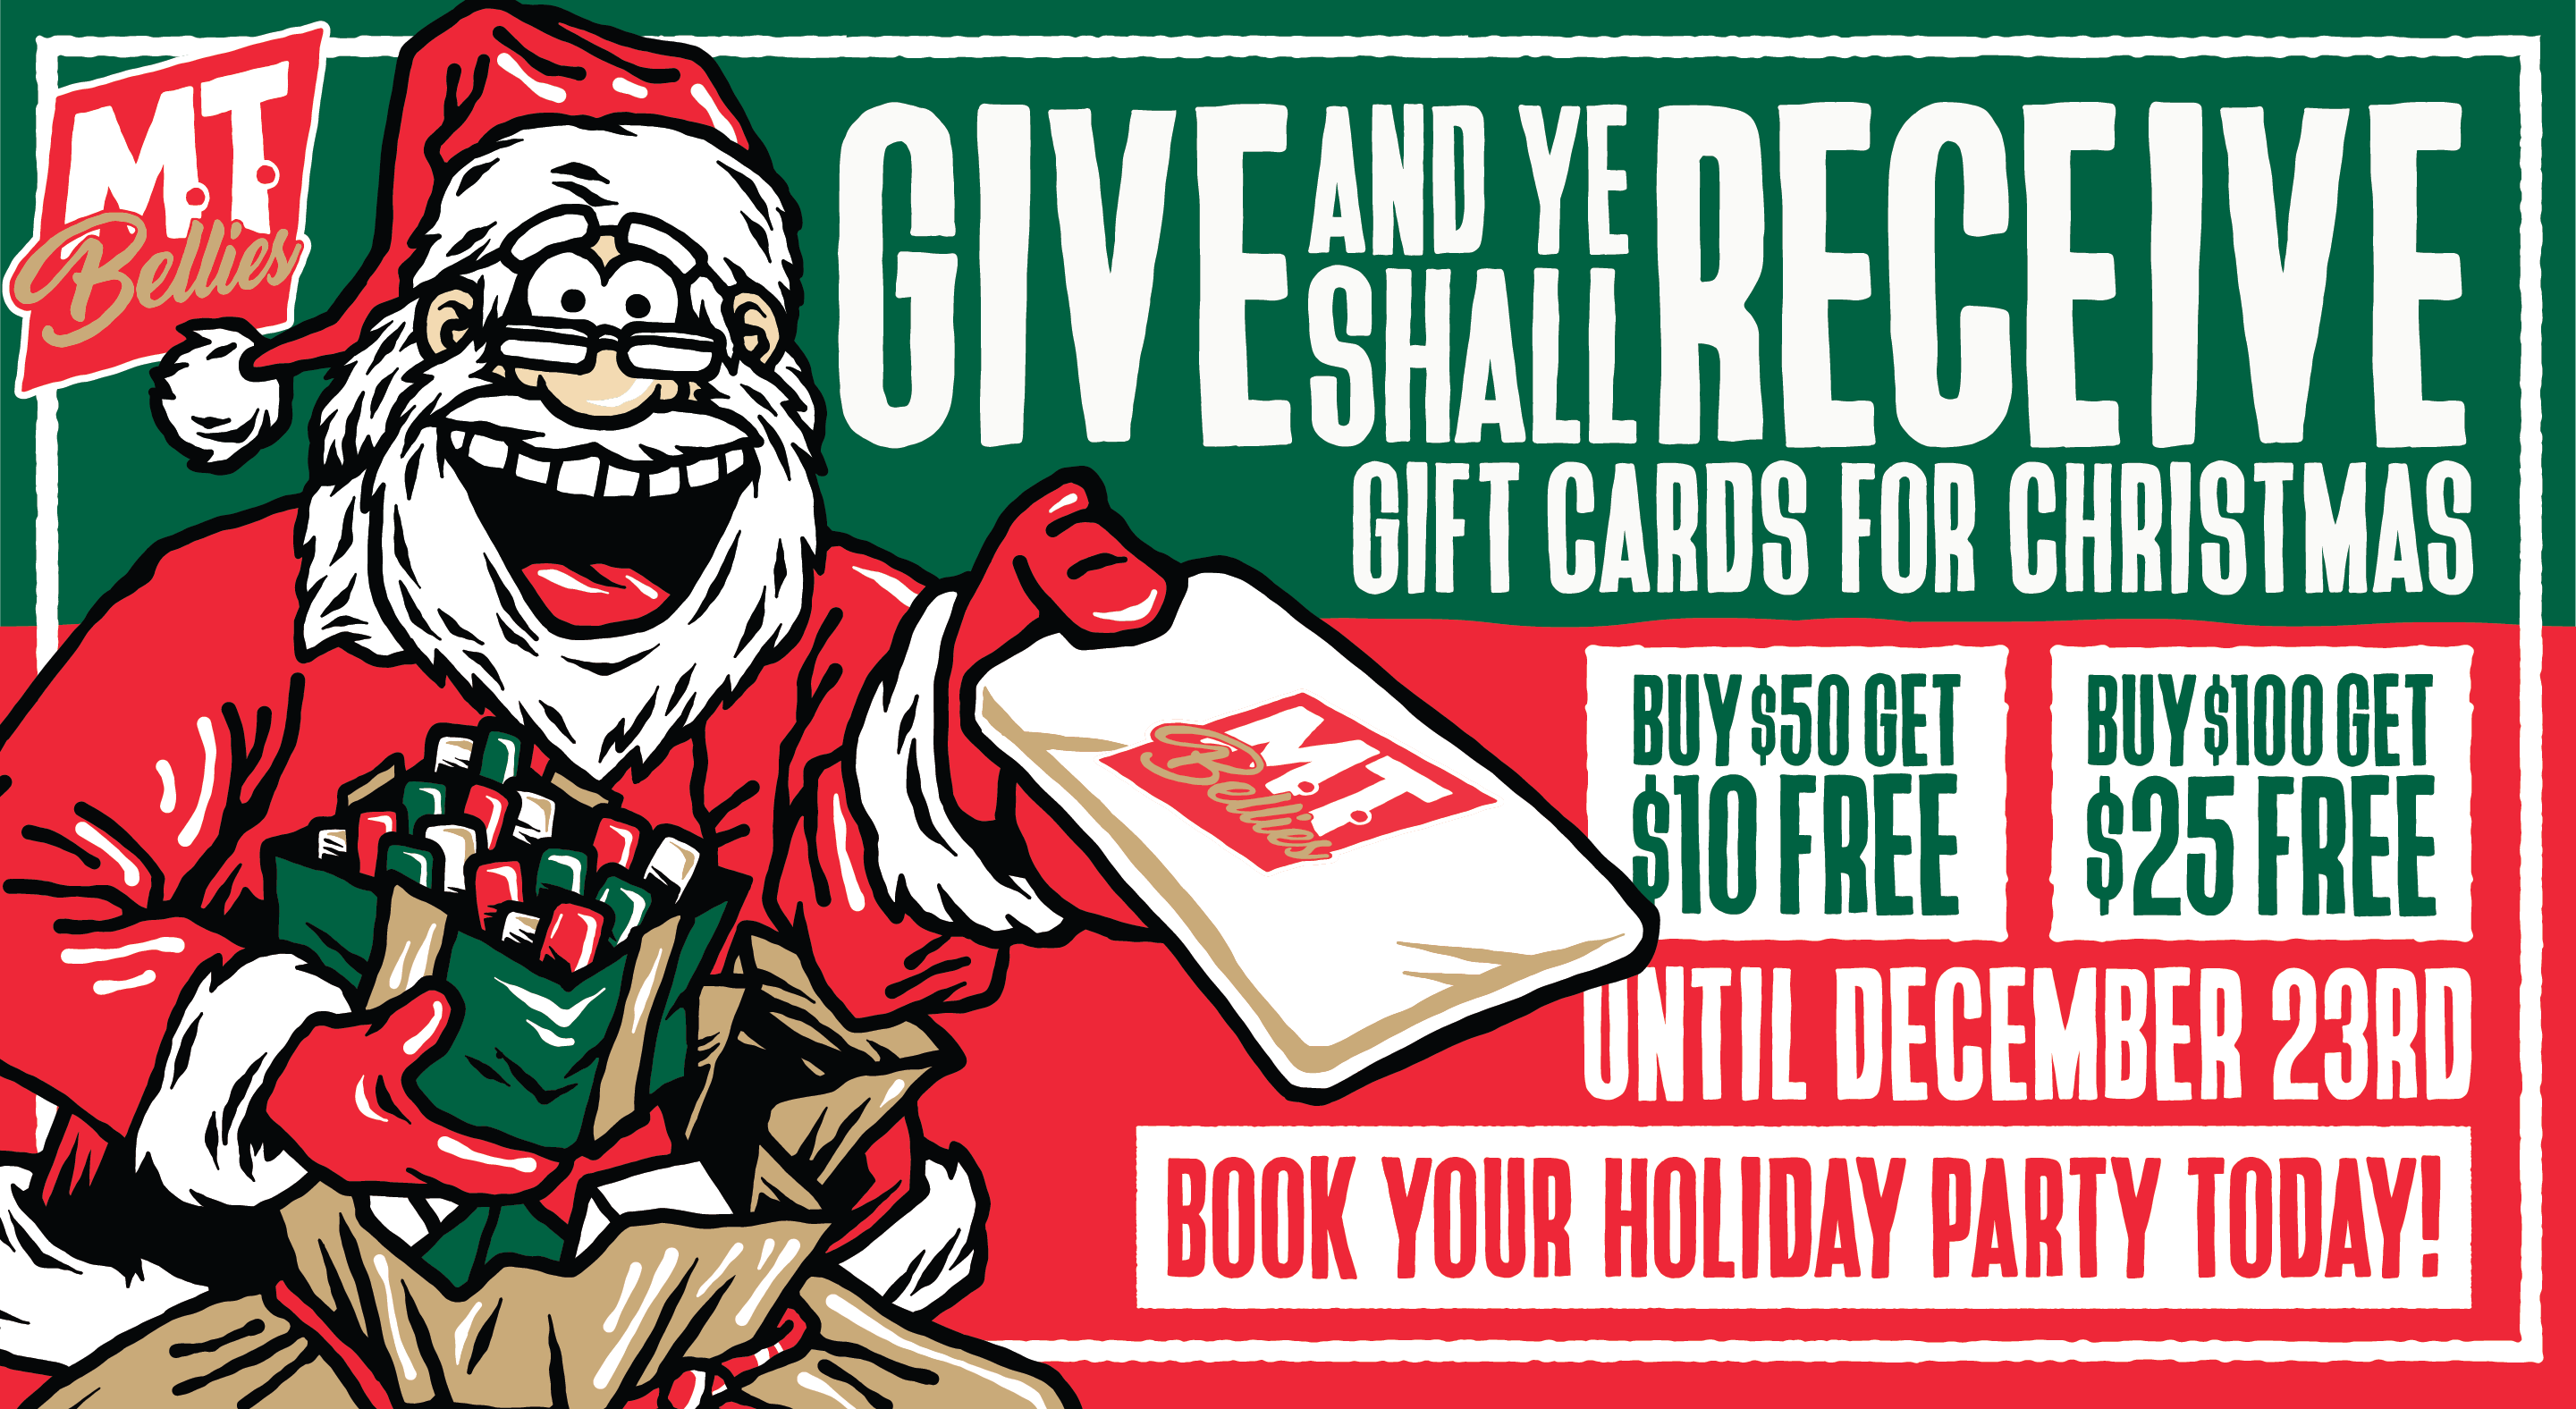 Give and Ye Shall Receive Gift Cards at M.T. Bellies